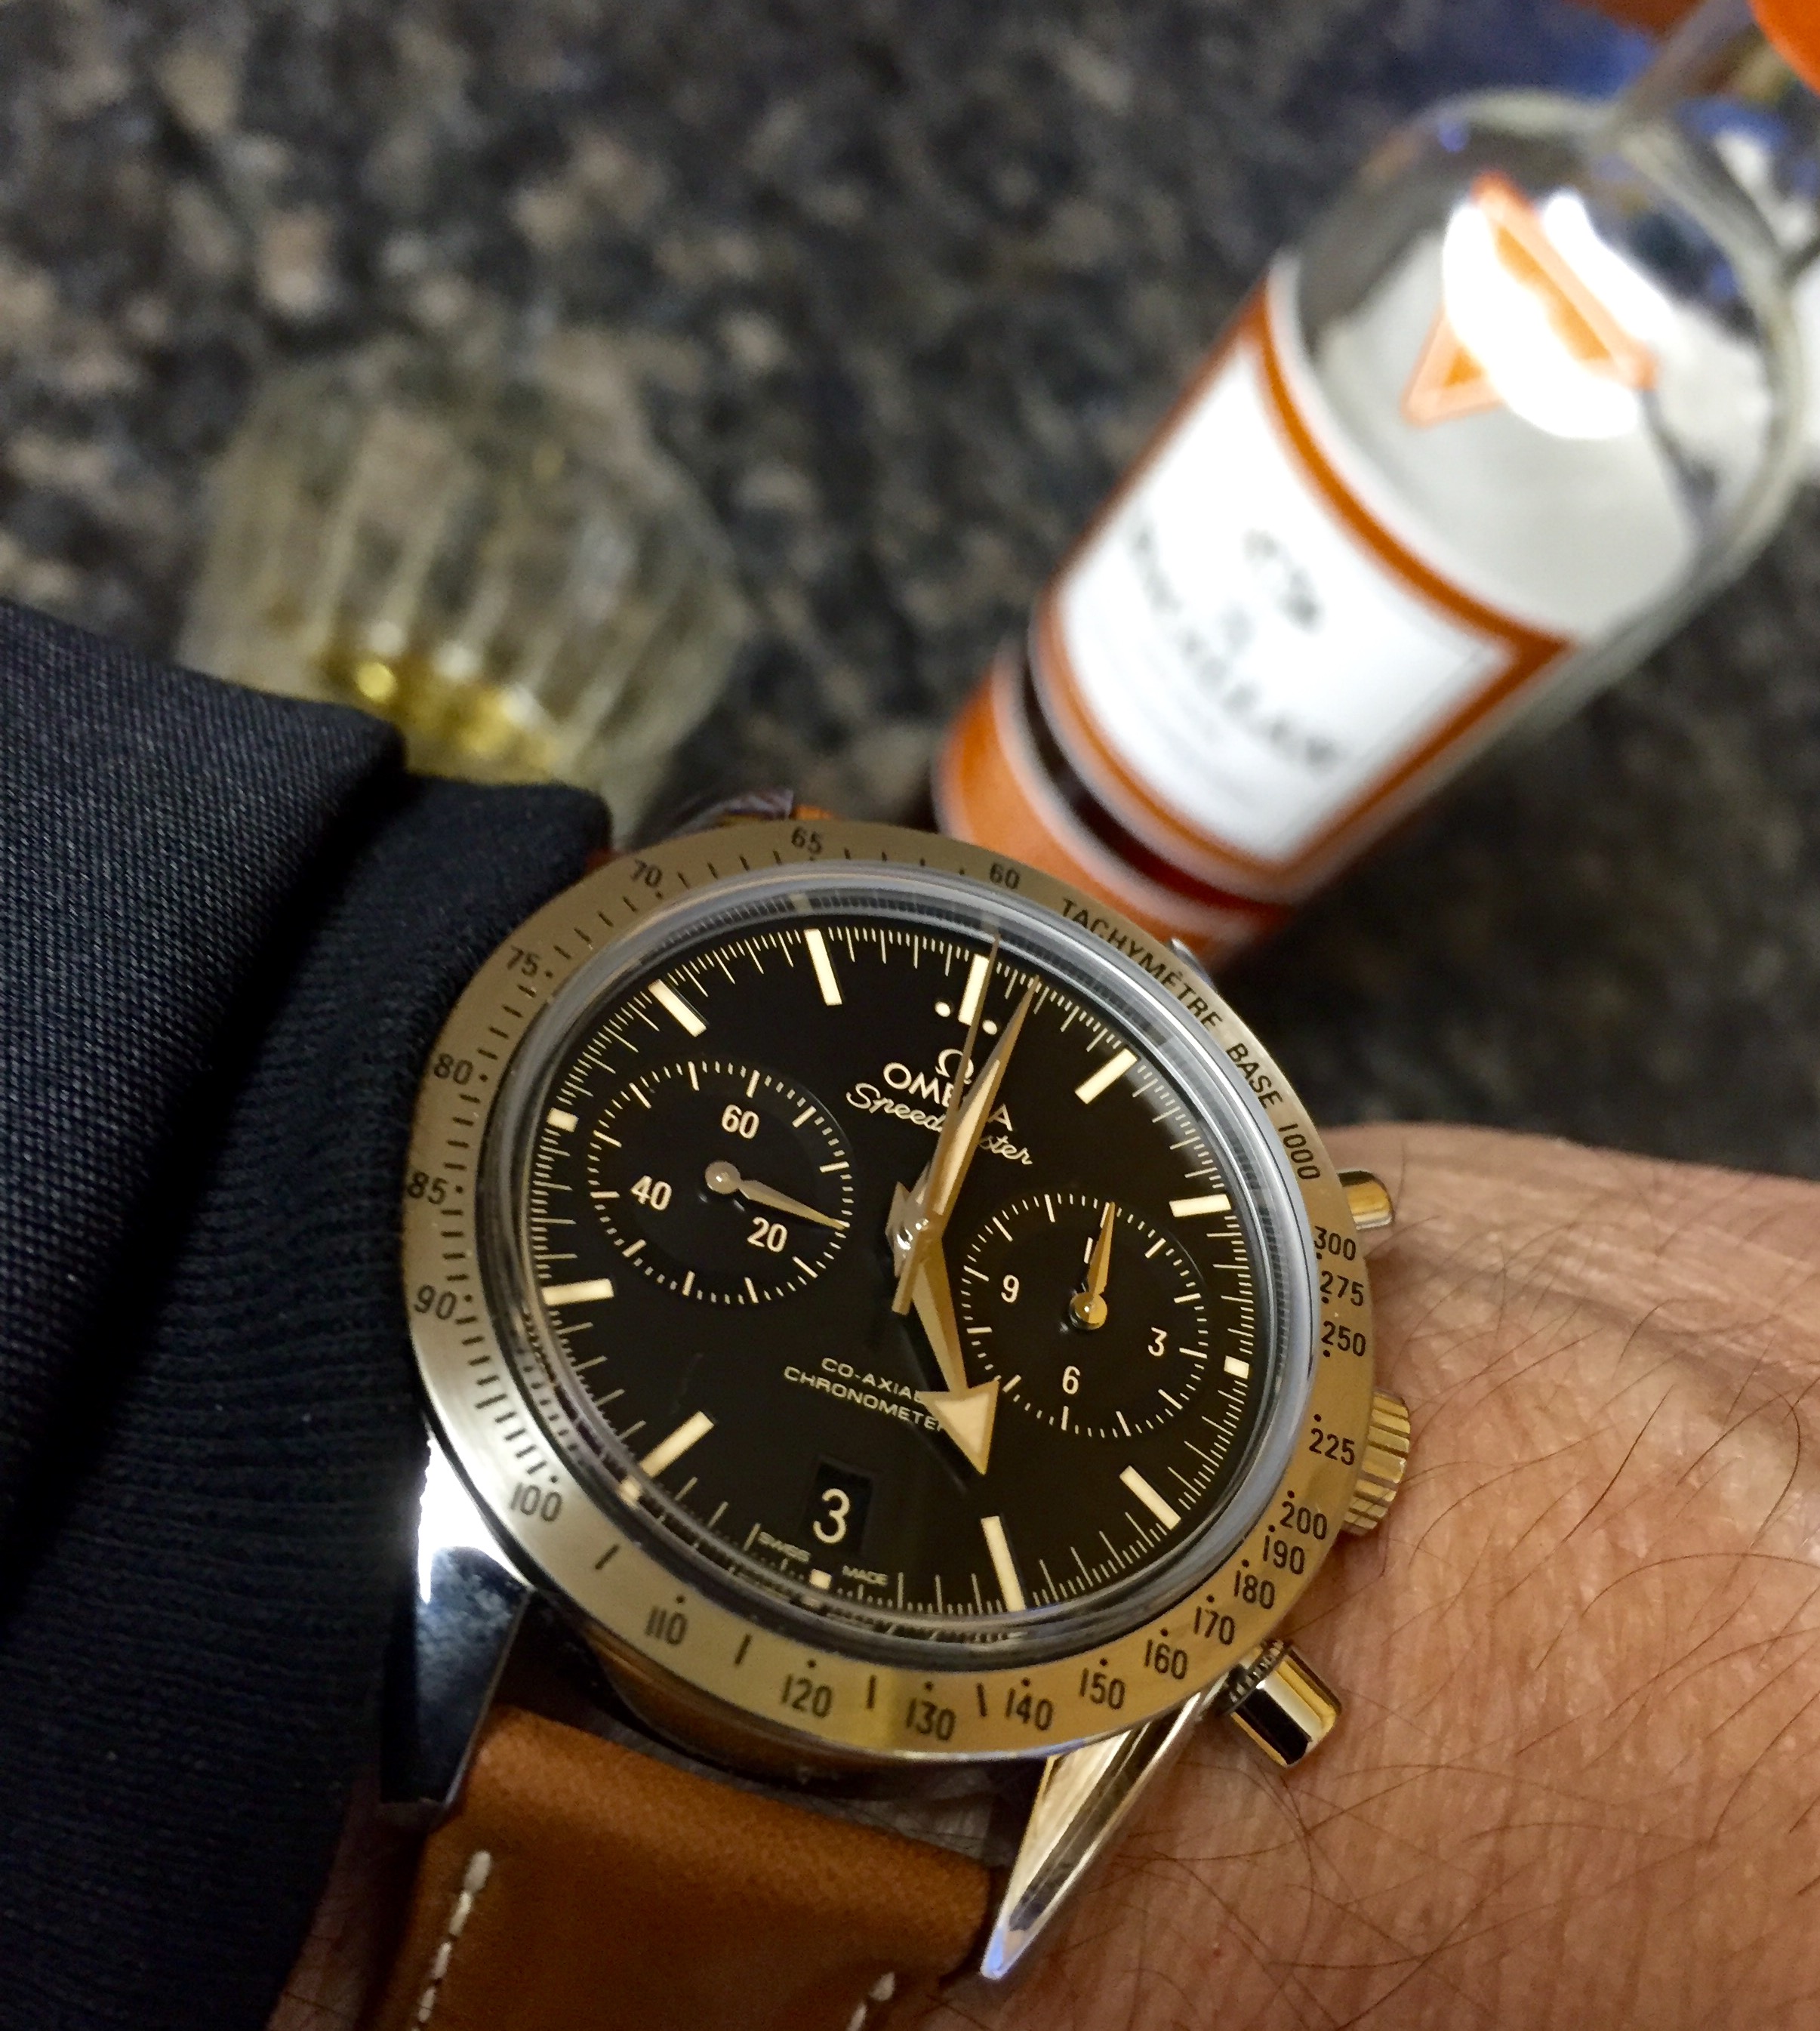 Any owners of the Omega Speedmaster 57 